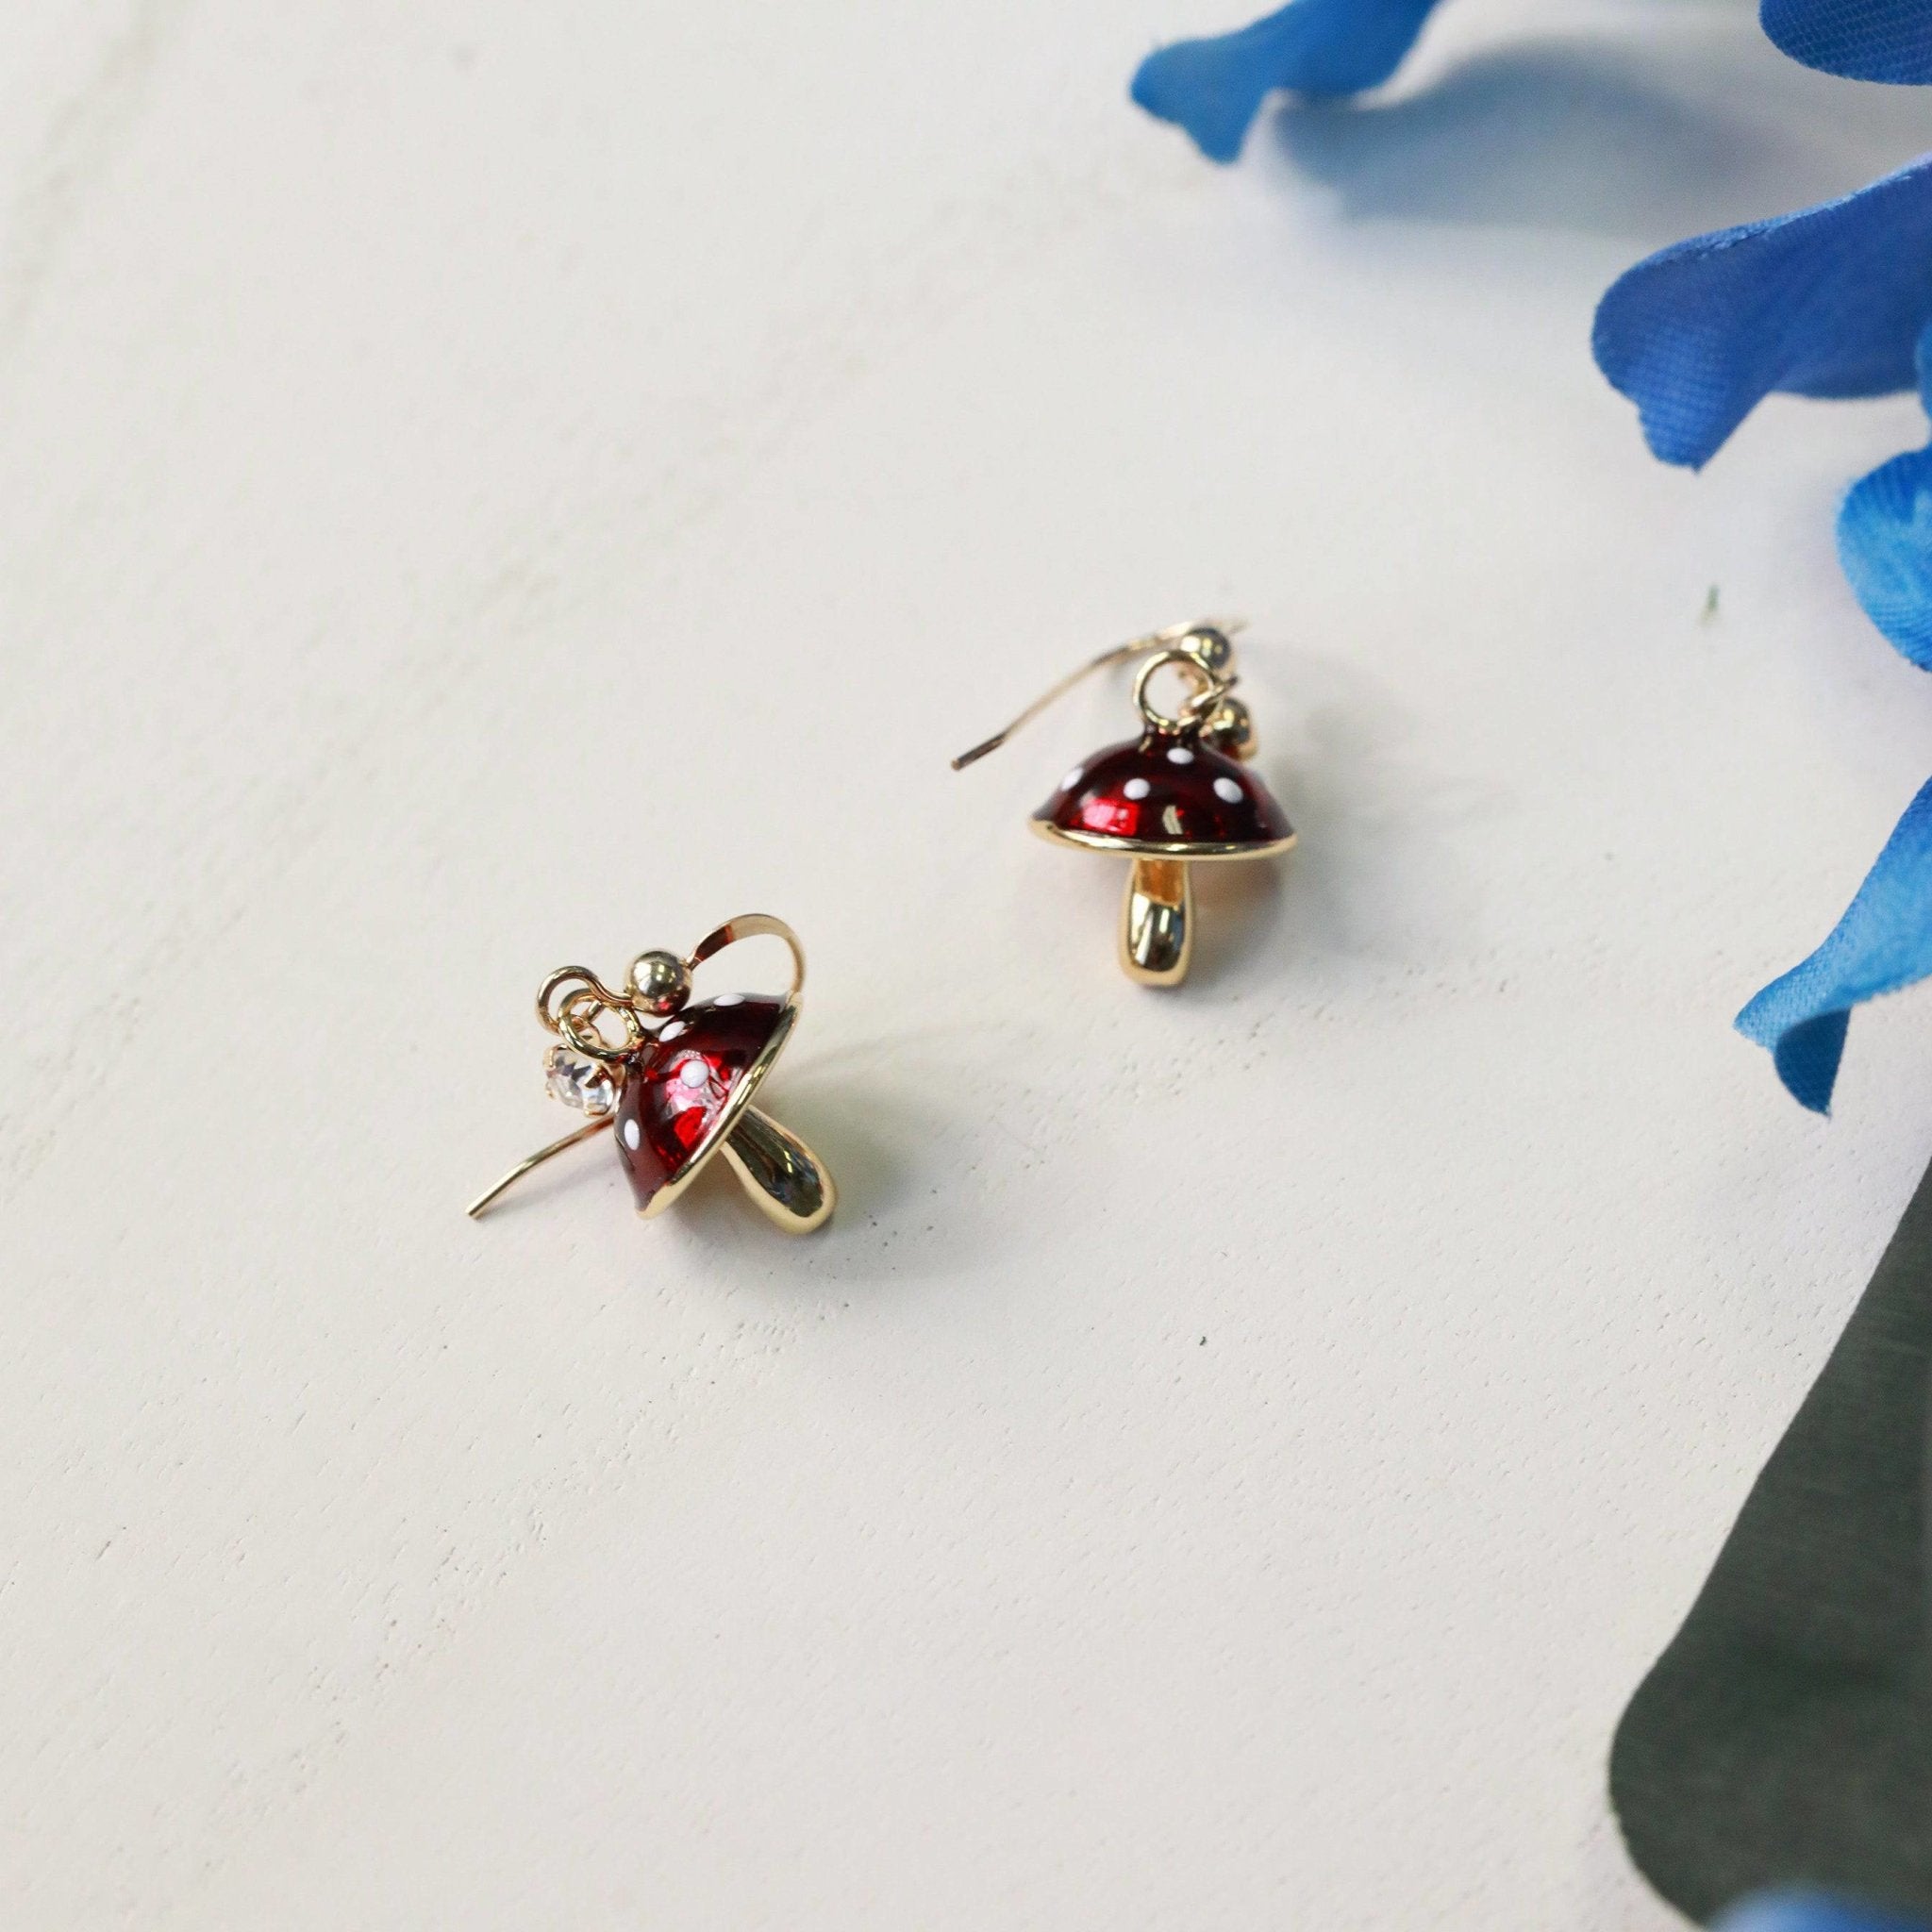 tiny mushroom charm earrings in red with white dots on 14kt gold filled earring hooks with tiny crystal charms front view